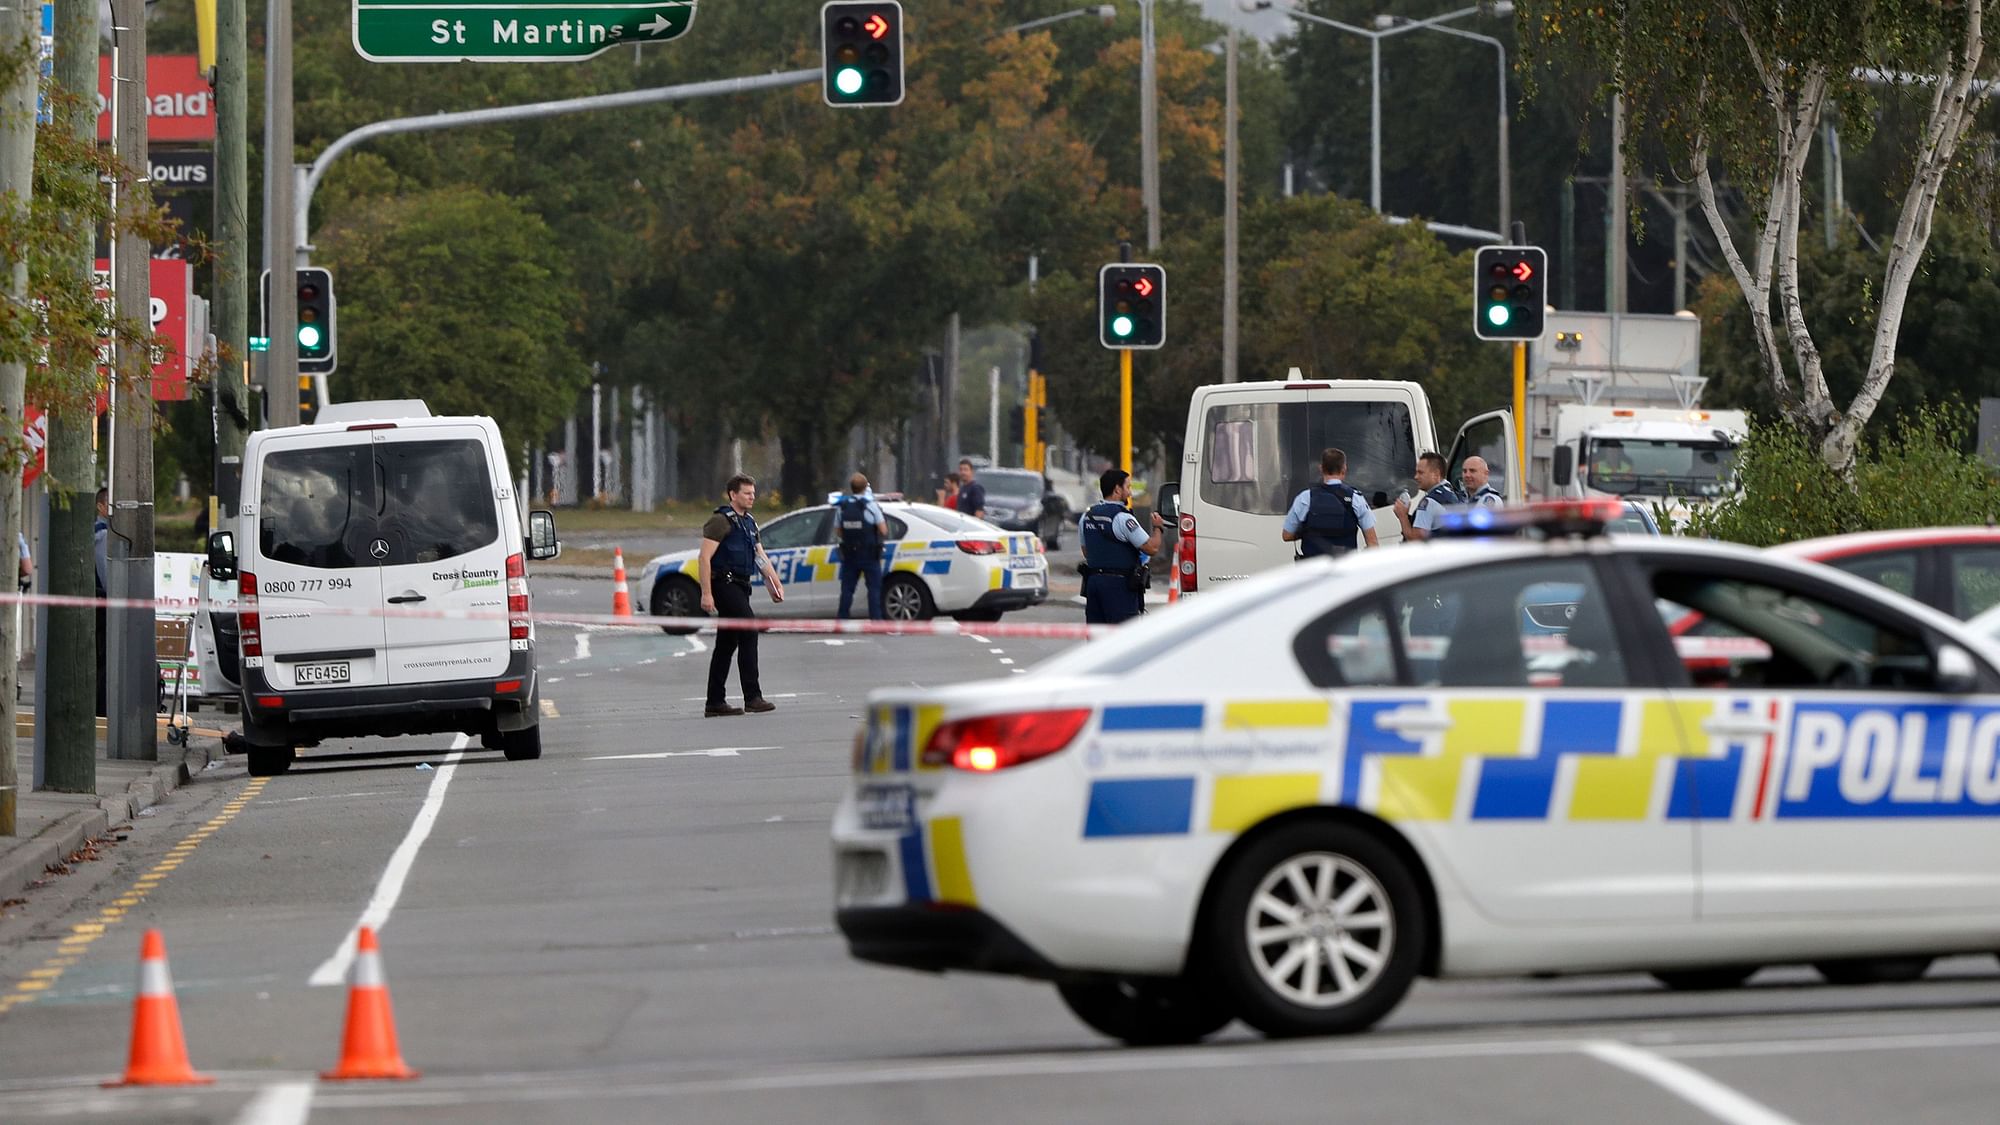 49 people were killed in New Zealand mosque shooting.